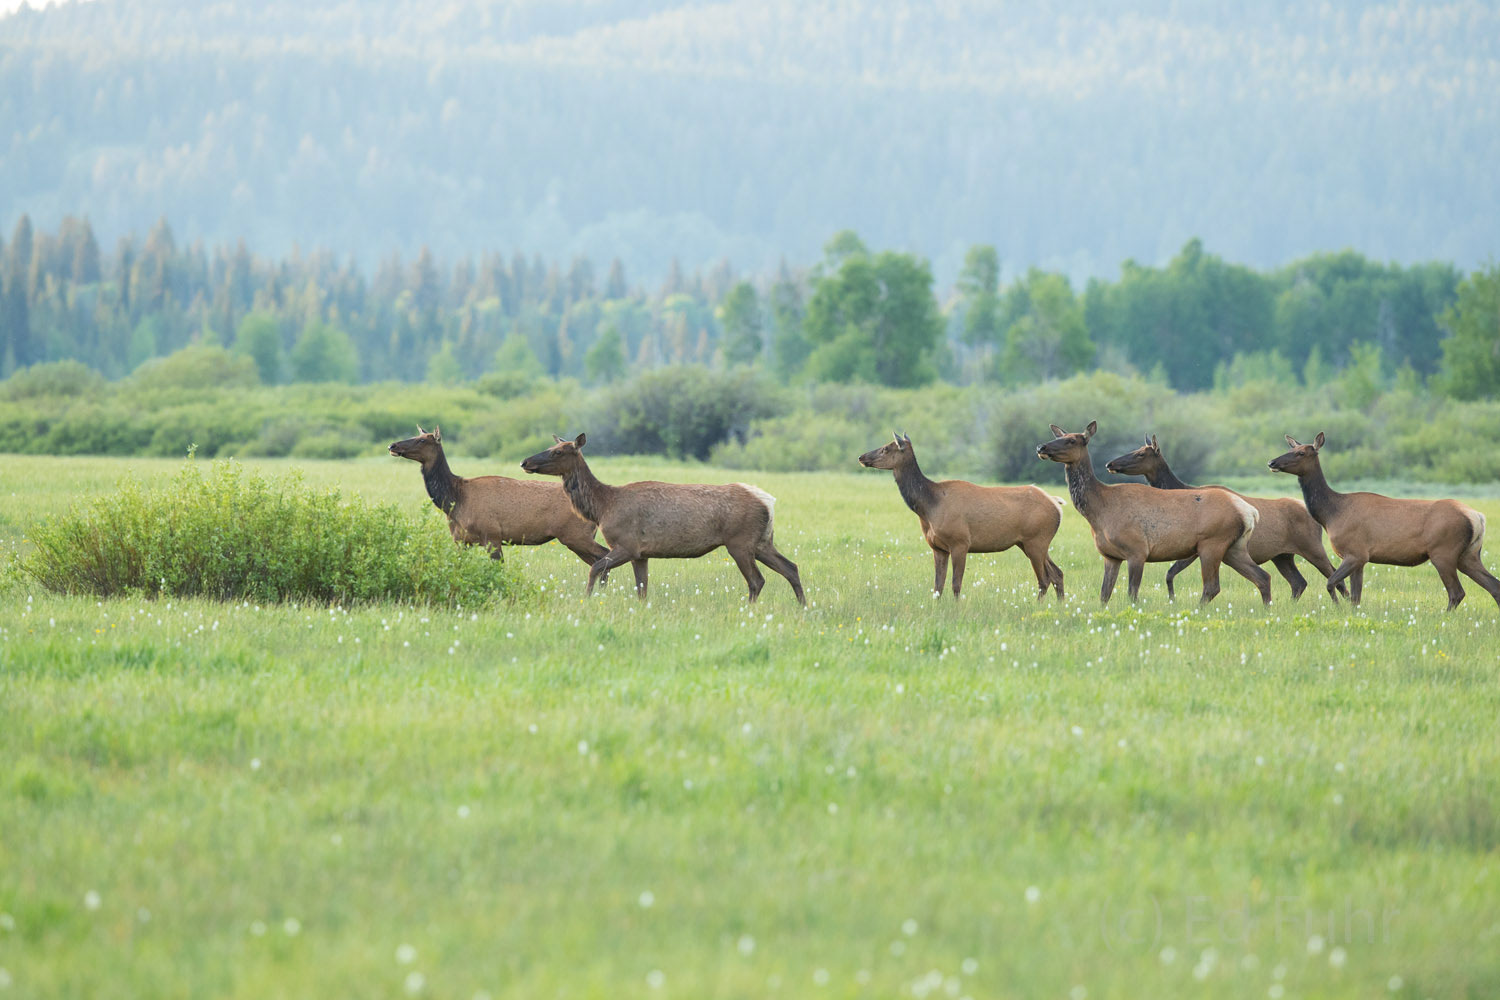 Elk stare intently into the willows where they know a grizzly bear stalks.